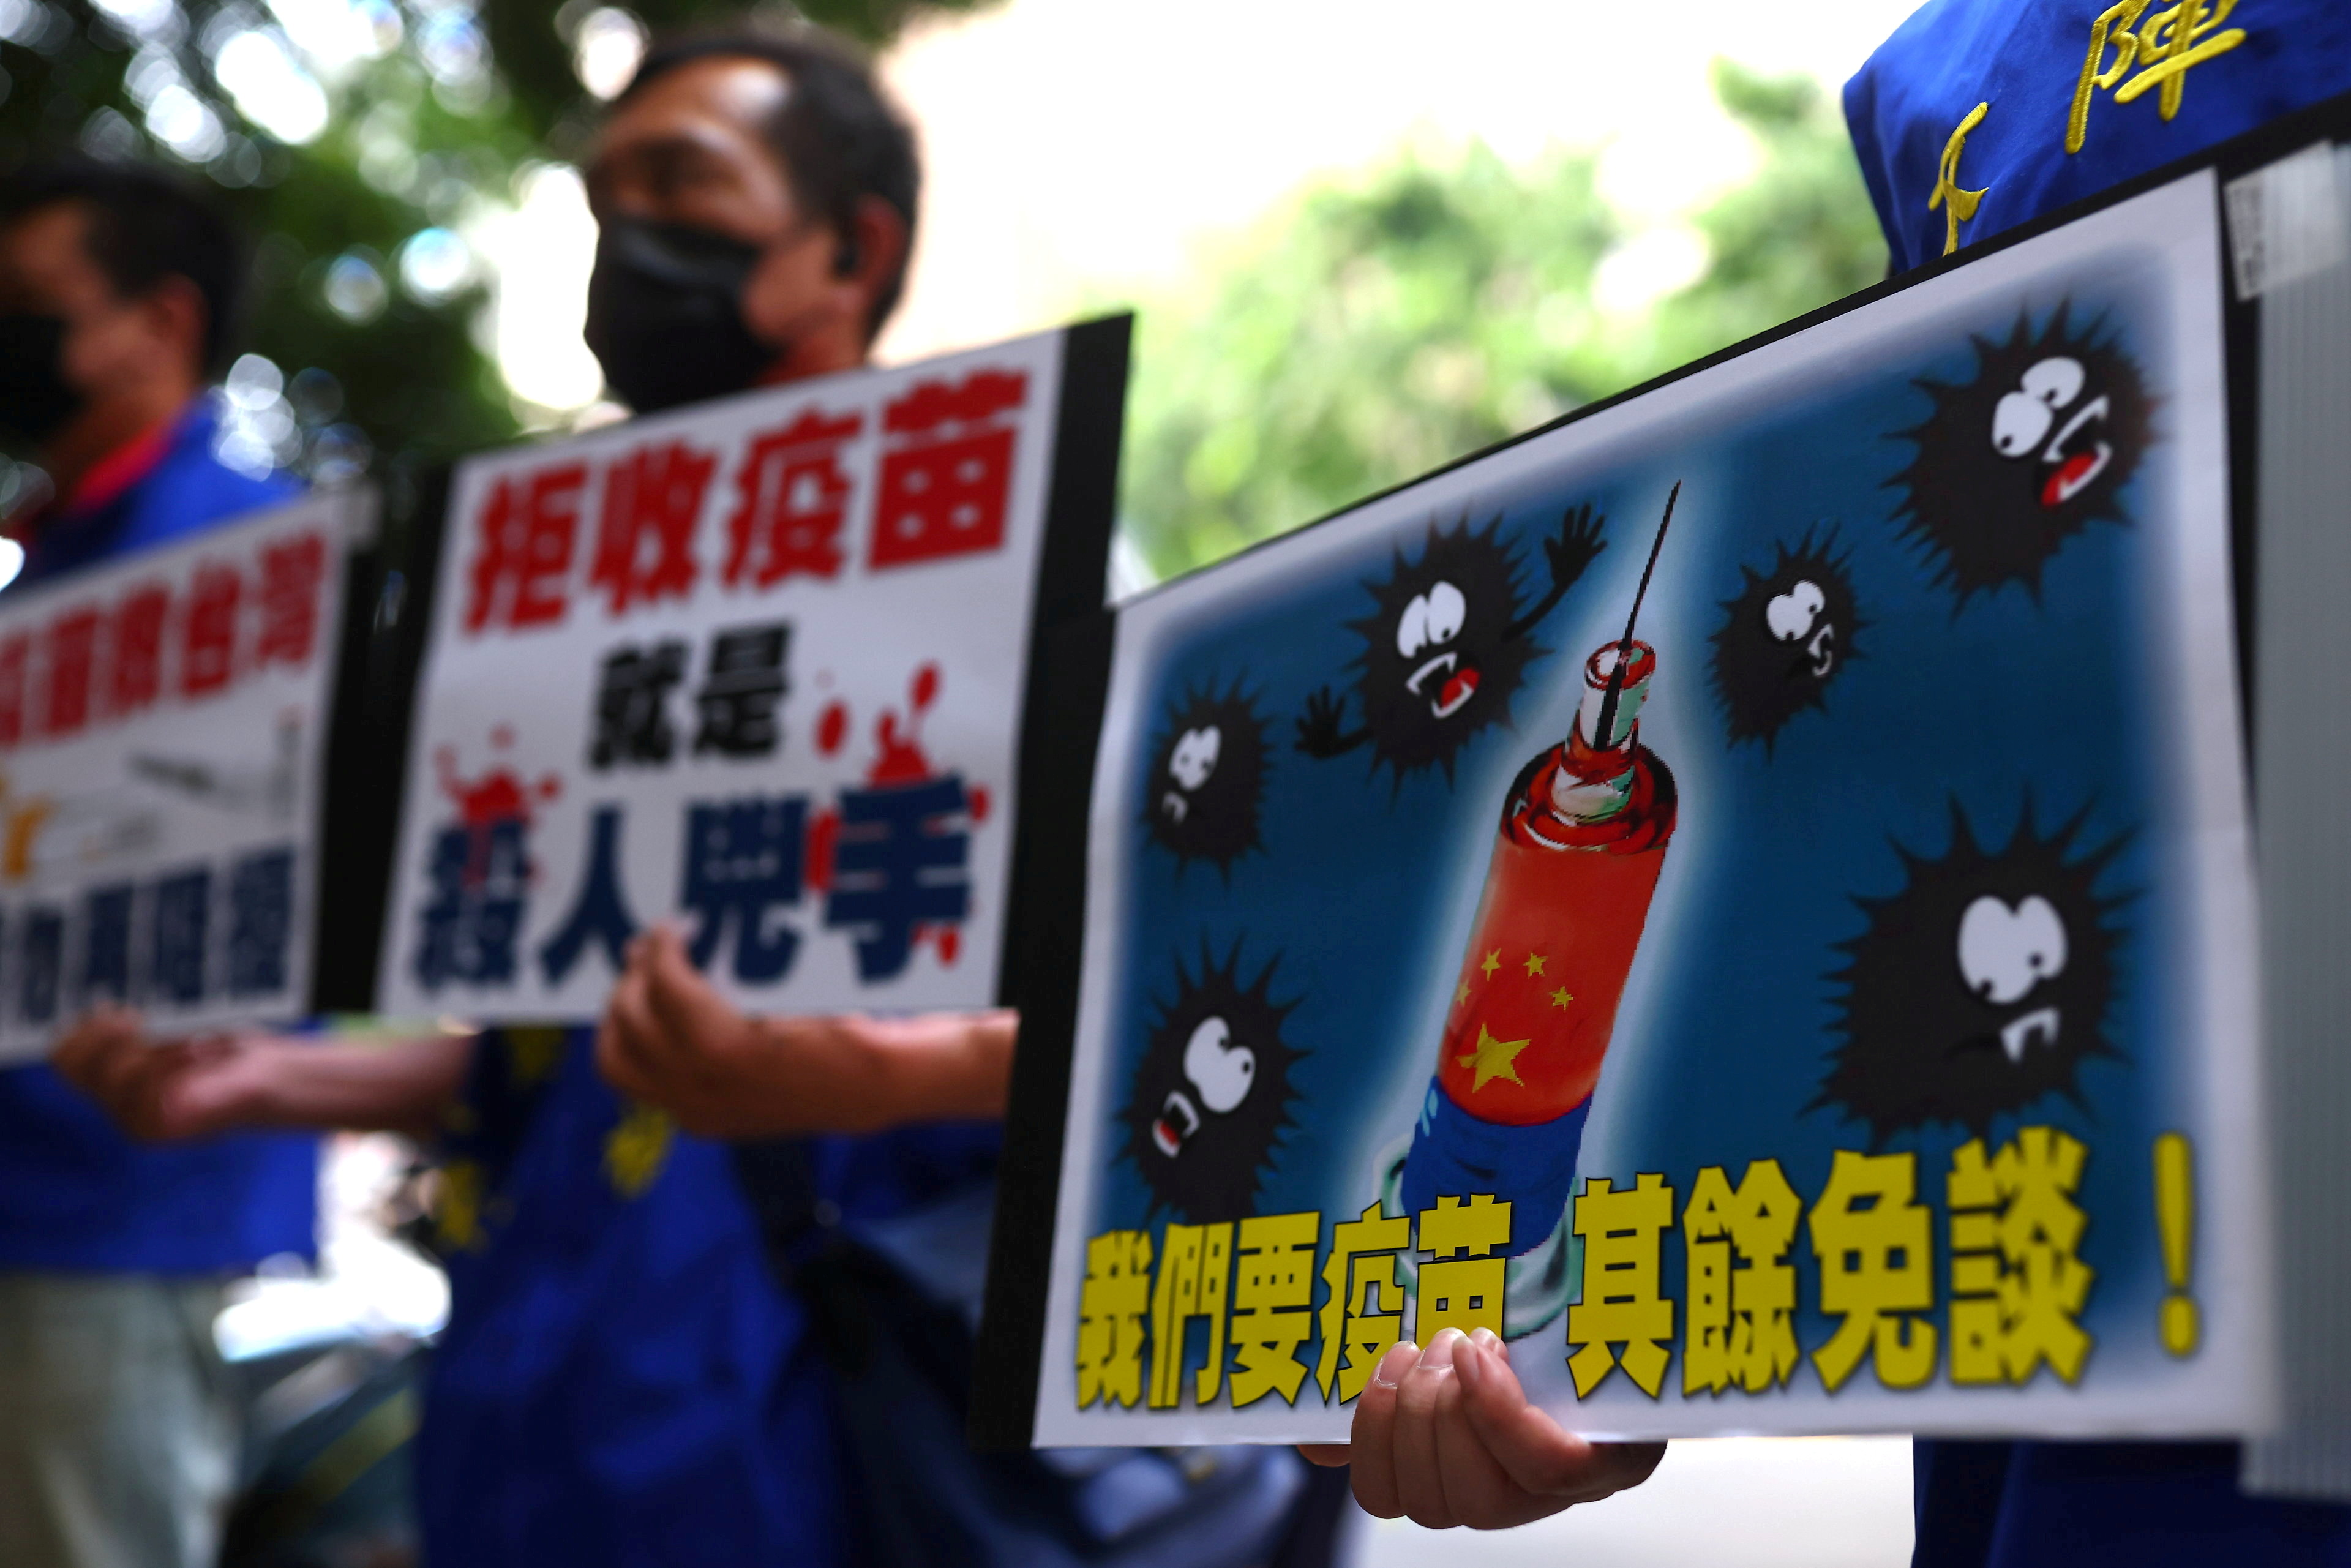 People call for Taiwan government to allow the use of COVID-19 vaccines from China, in Taipei